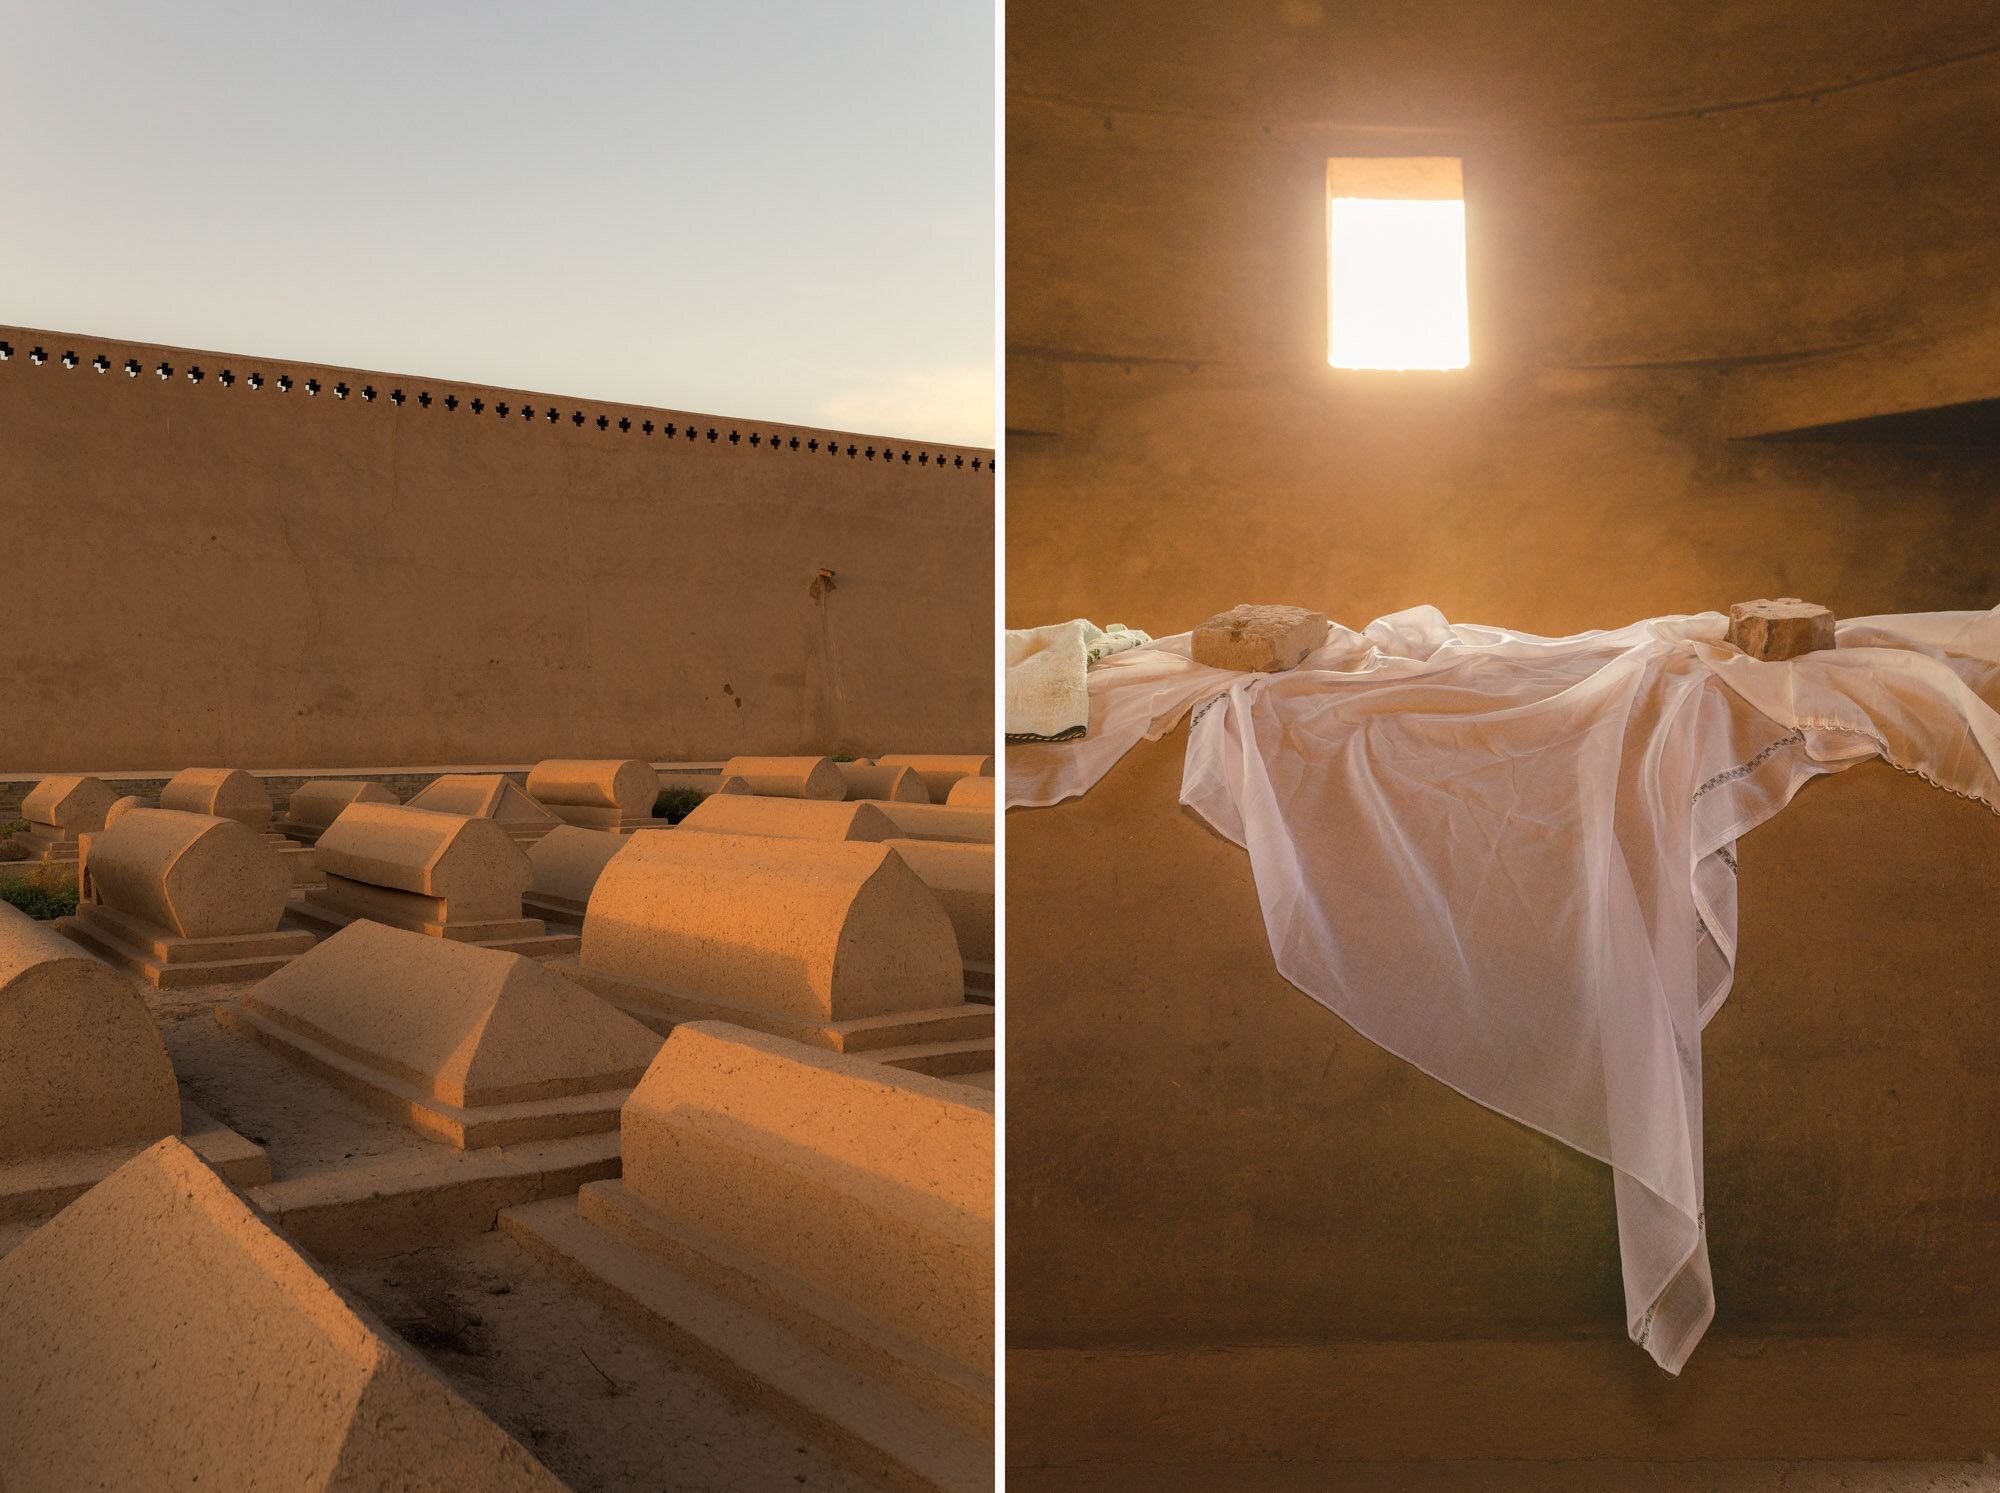  September 26th 2019. Turpan, Xinjiang province, China. A scarf rests on a tomb in the burial ground on the site of the Emin Minaret and Mosque. 